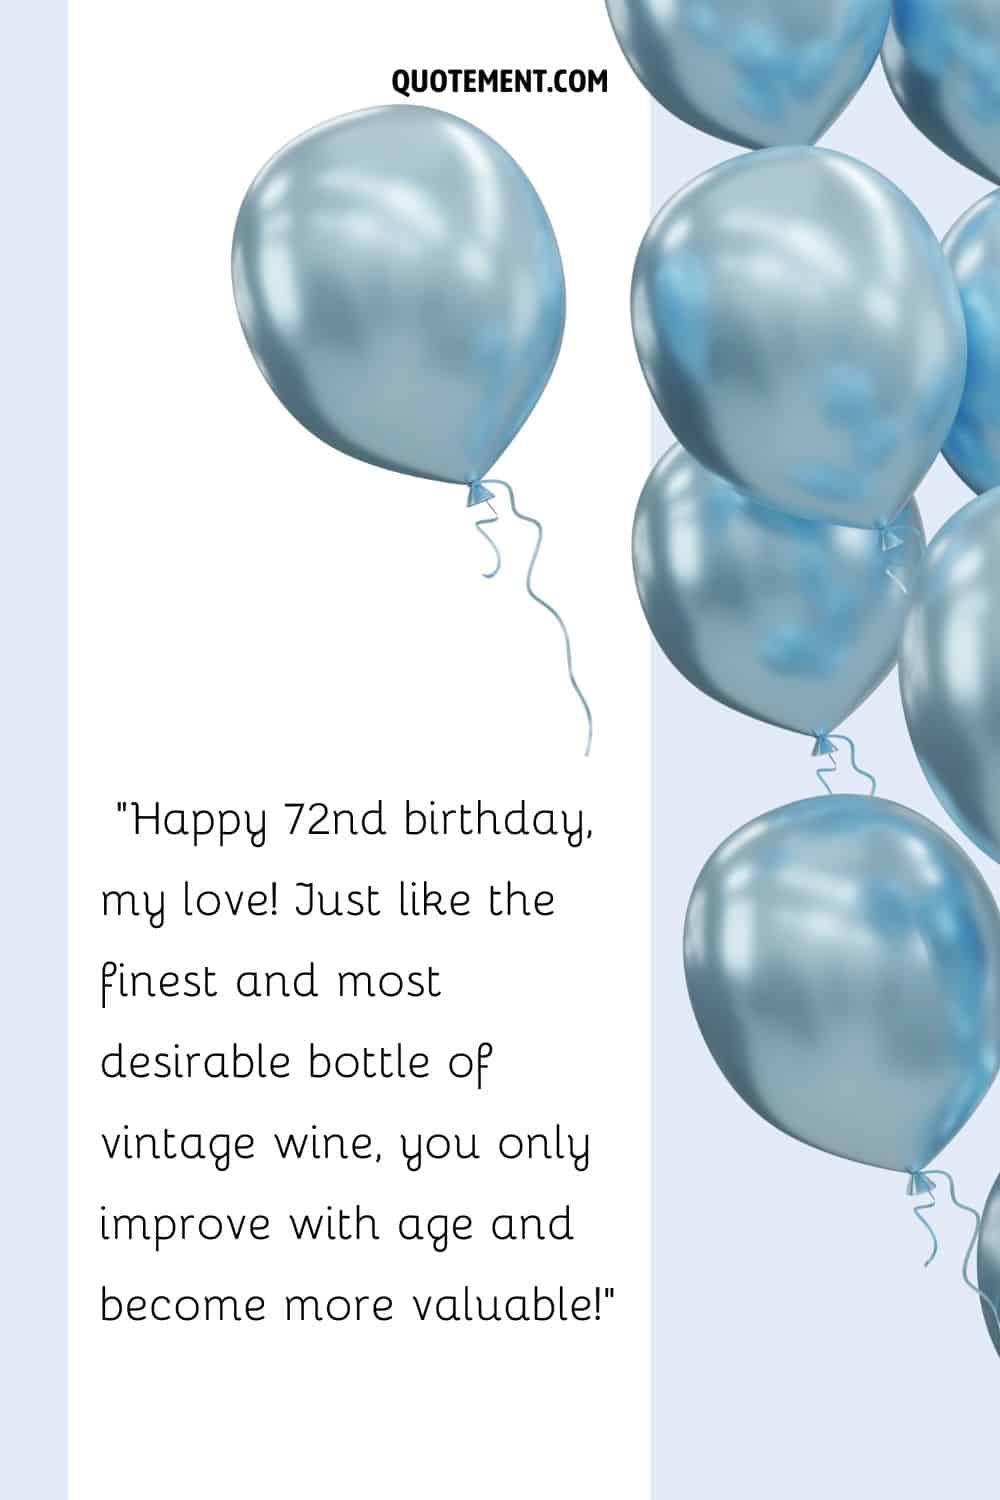 shiny blue balloons representing sweet birthday wish for my hubby